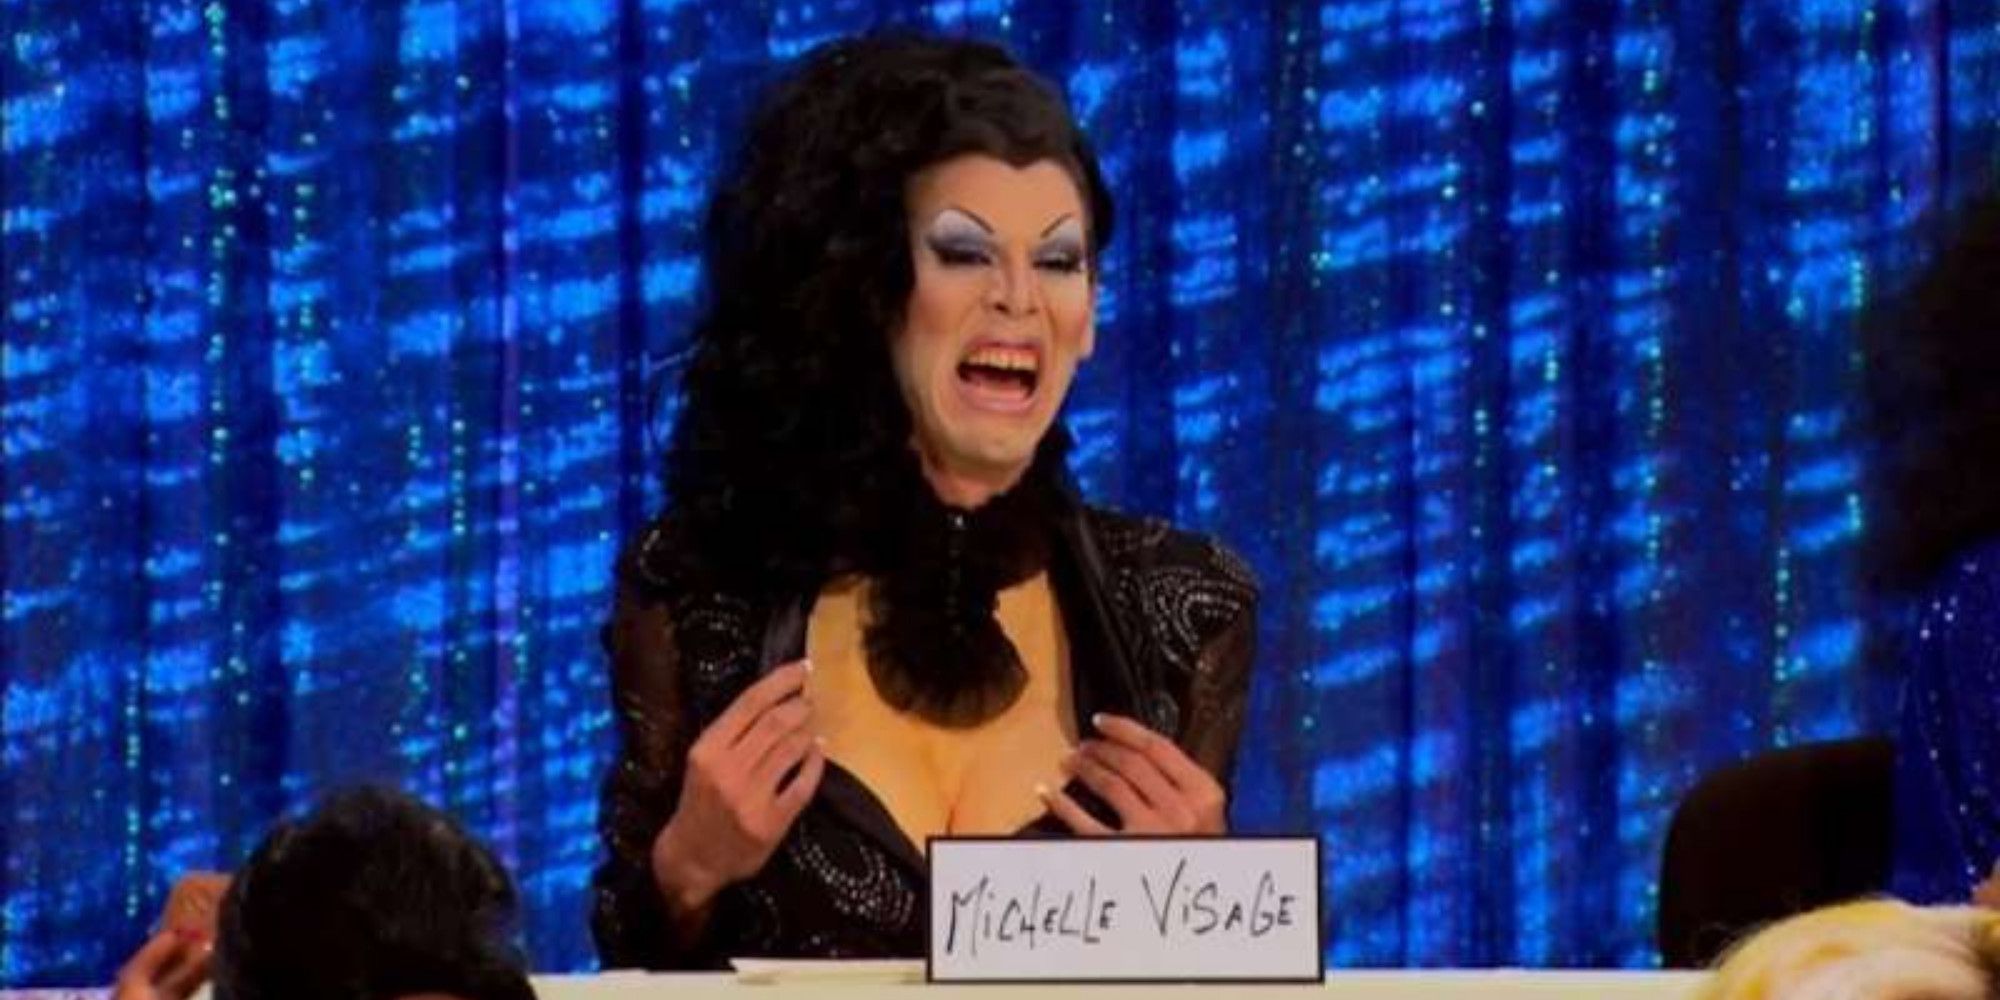 Drag queen Sharon Needles portrays Michelle Visage in the Snatch Game on RuPaul's Drag Race